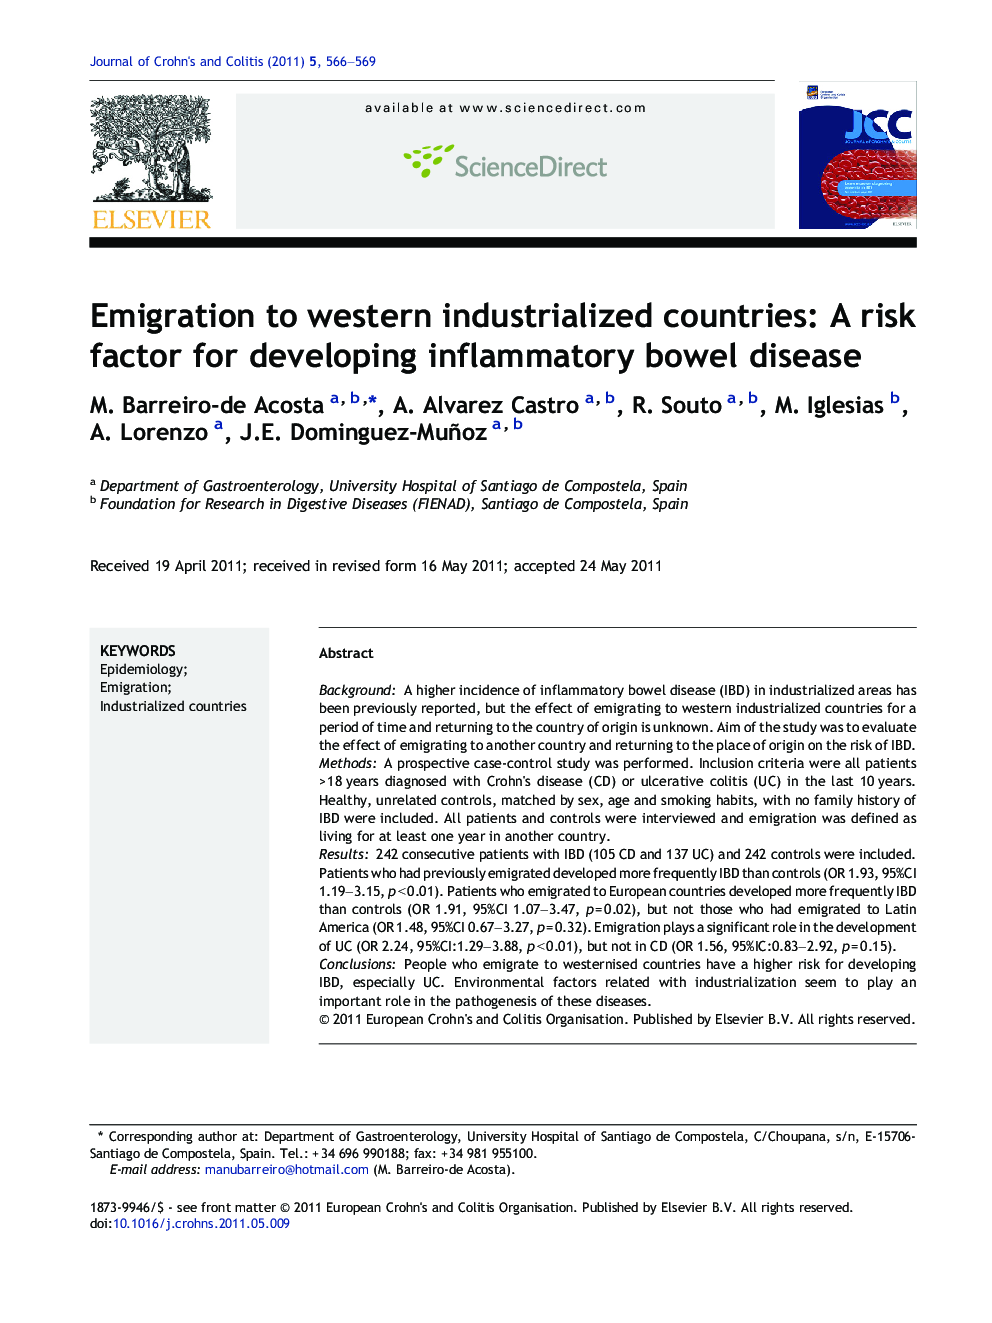 Emigration to western industrialized countries: A risk factor for developing inflammatory bowel disease